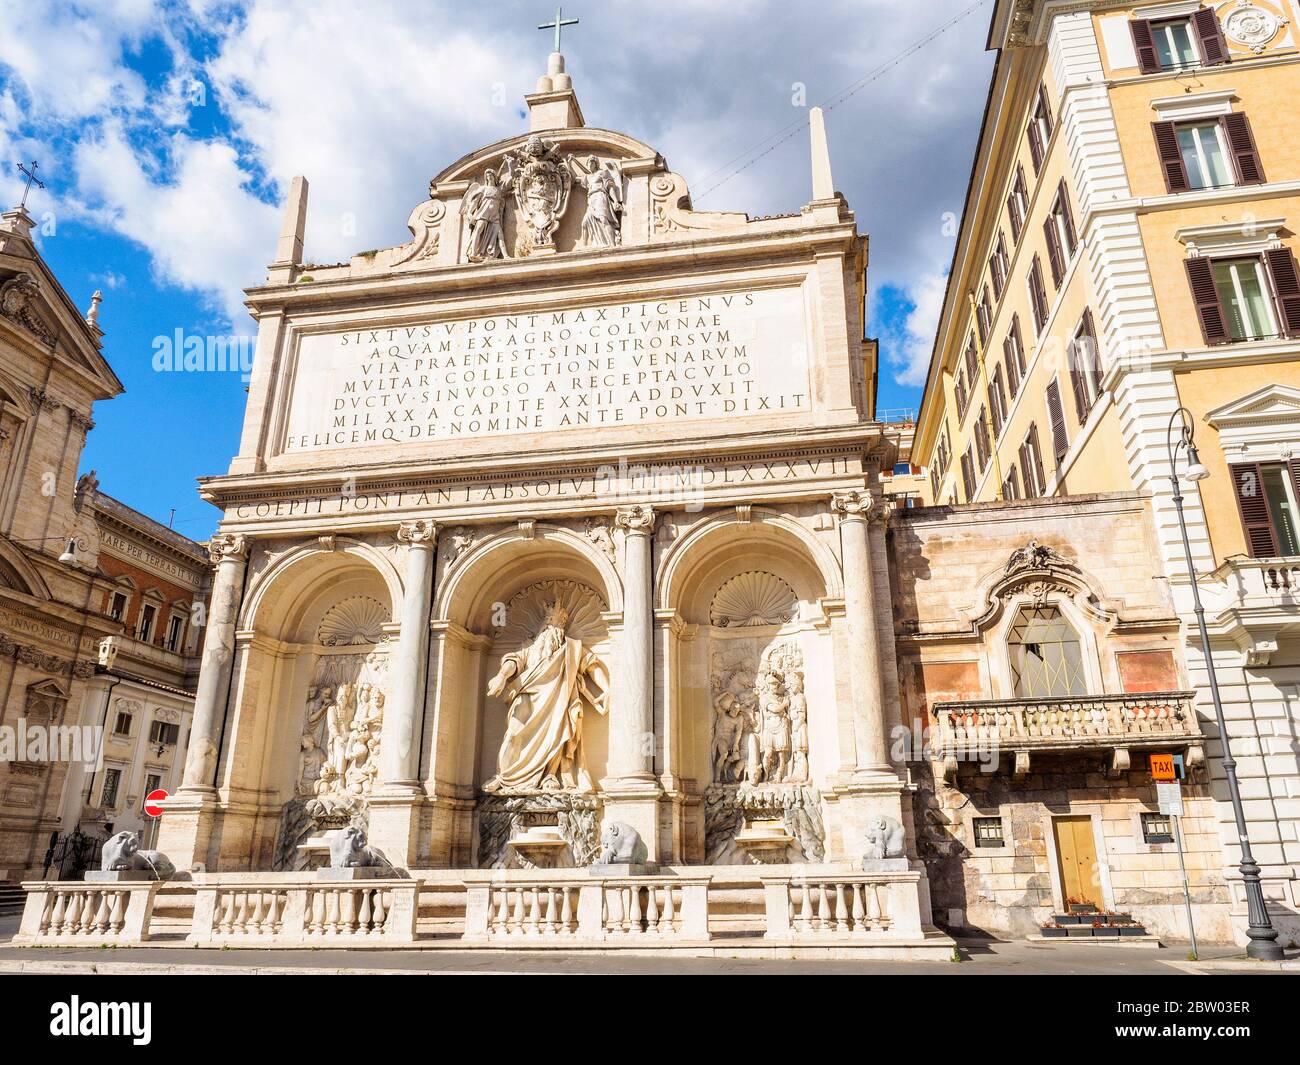 The Fontana dell'Acqua Felice, also called the Fountain of Moses. It marked the terminus of the Acqua Felice aqueduct restored by Pope Sixtus V. It was designed by Domenico Fontana and built in 1585-88 - Rome, Italy Stock Photo